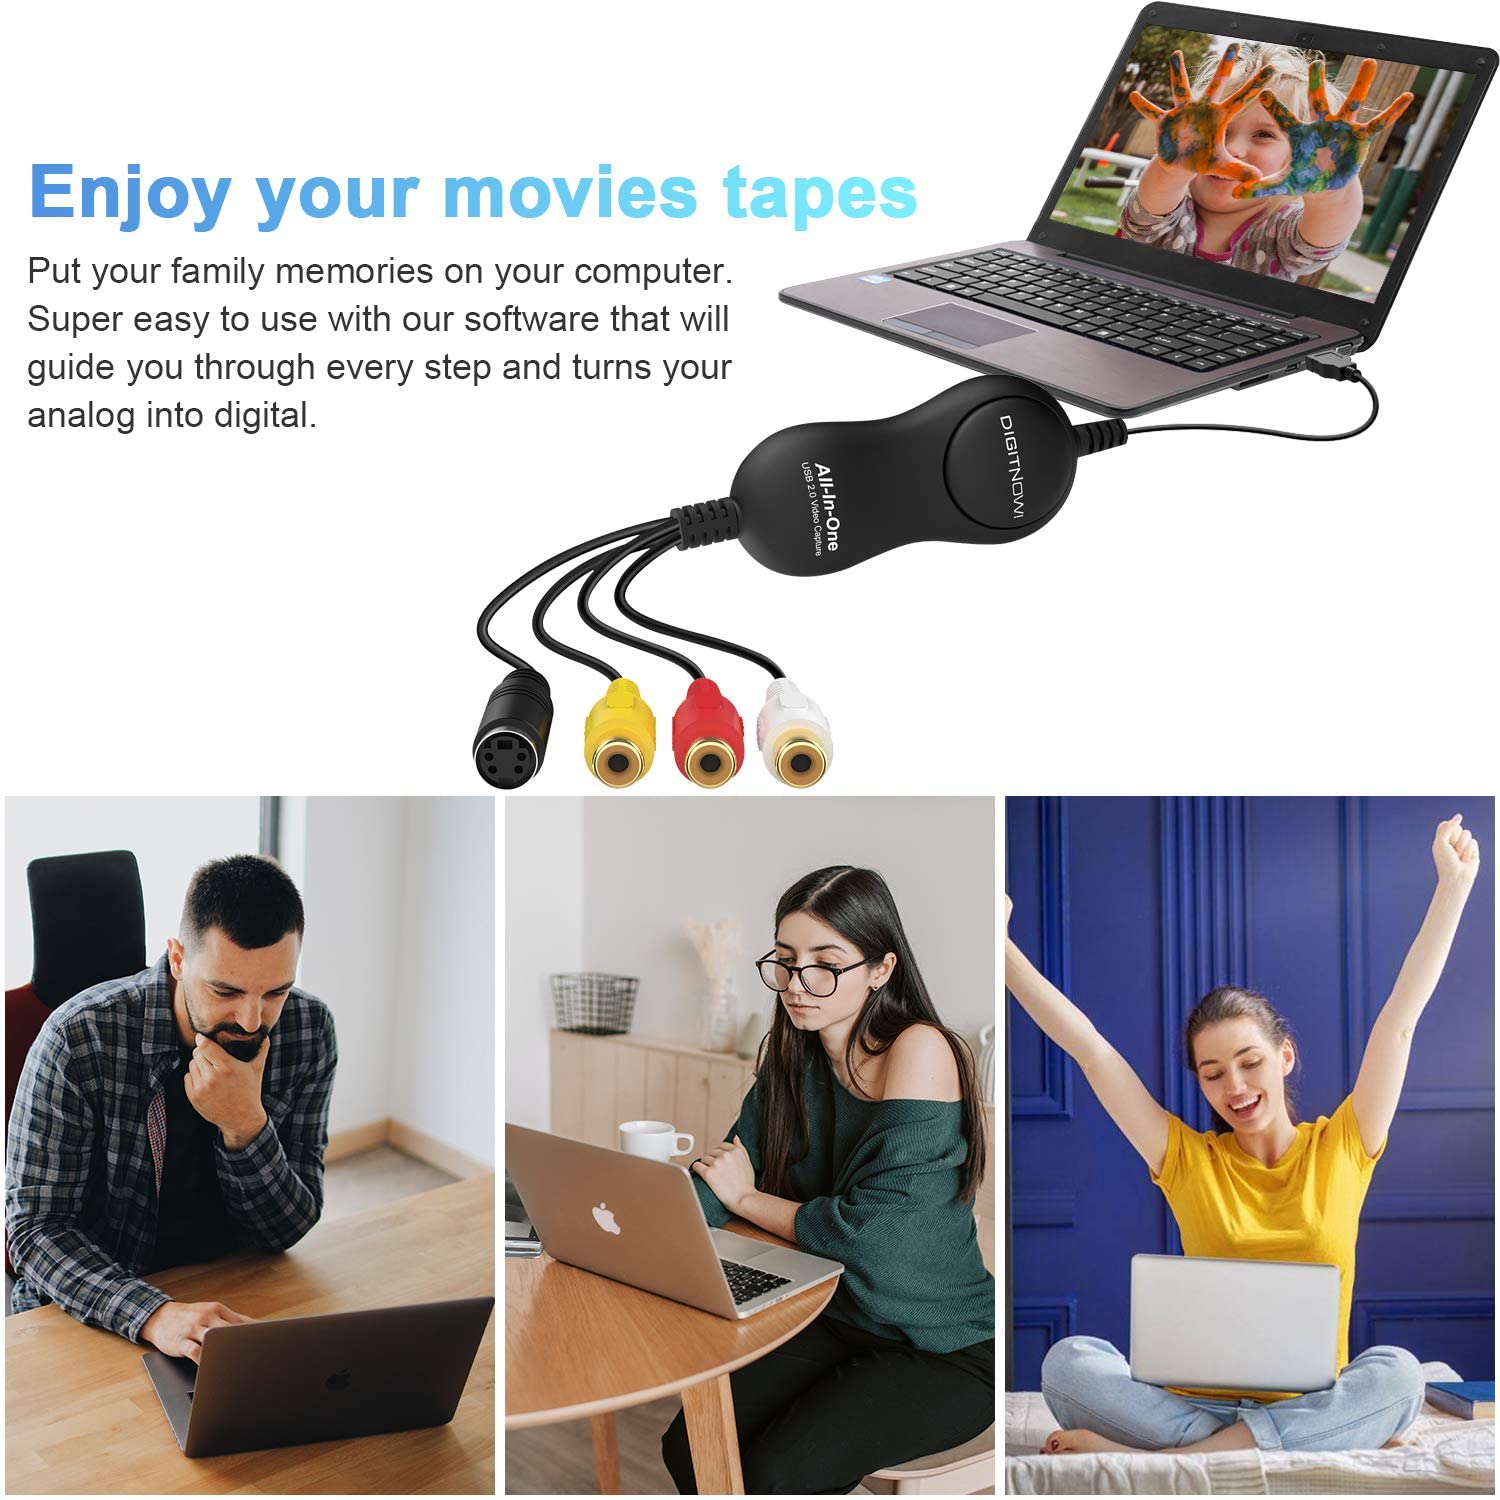 DIGITNOW USB 2.0 Video Capture Card Device Video Grabber One Touch VHS VCR TV to DVD Converter, Transfer VHS Home Videos to Mac OS X PC Windows 7 8 10